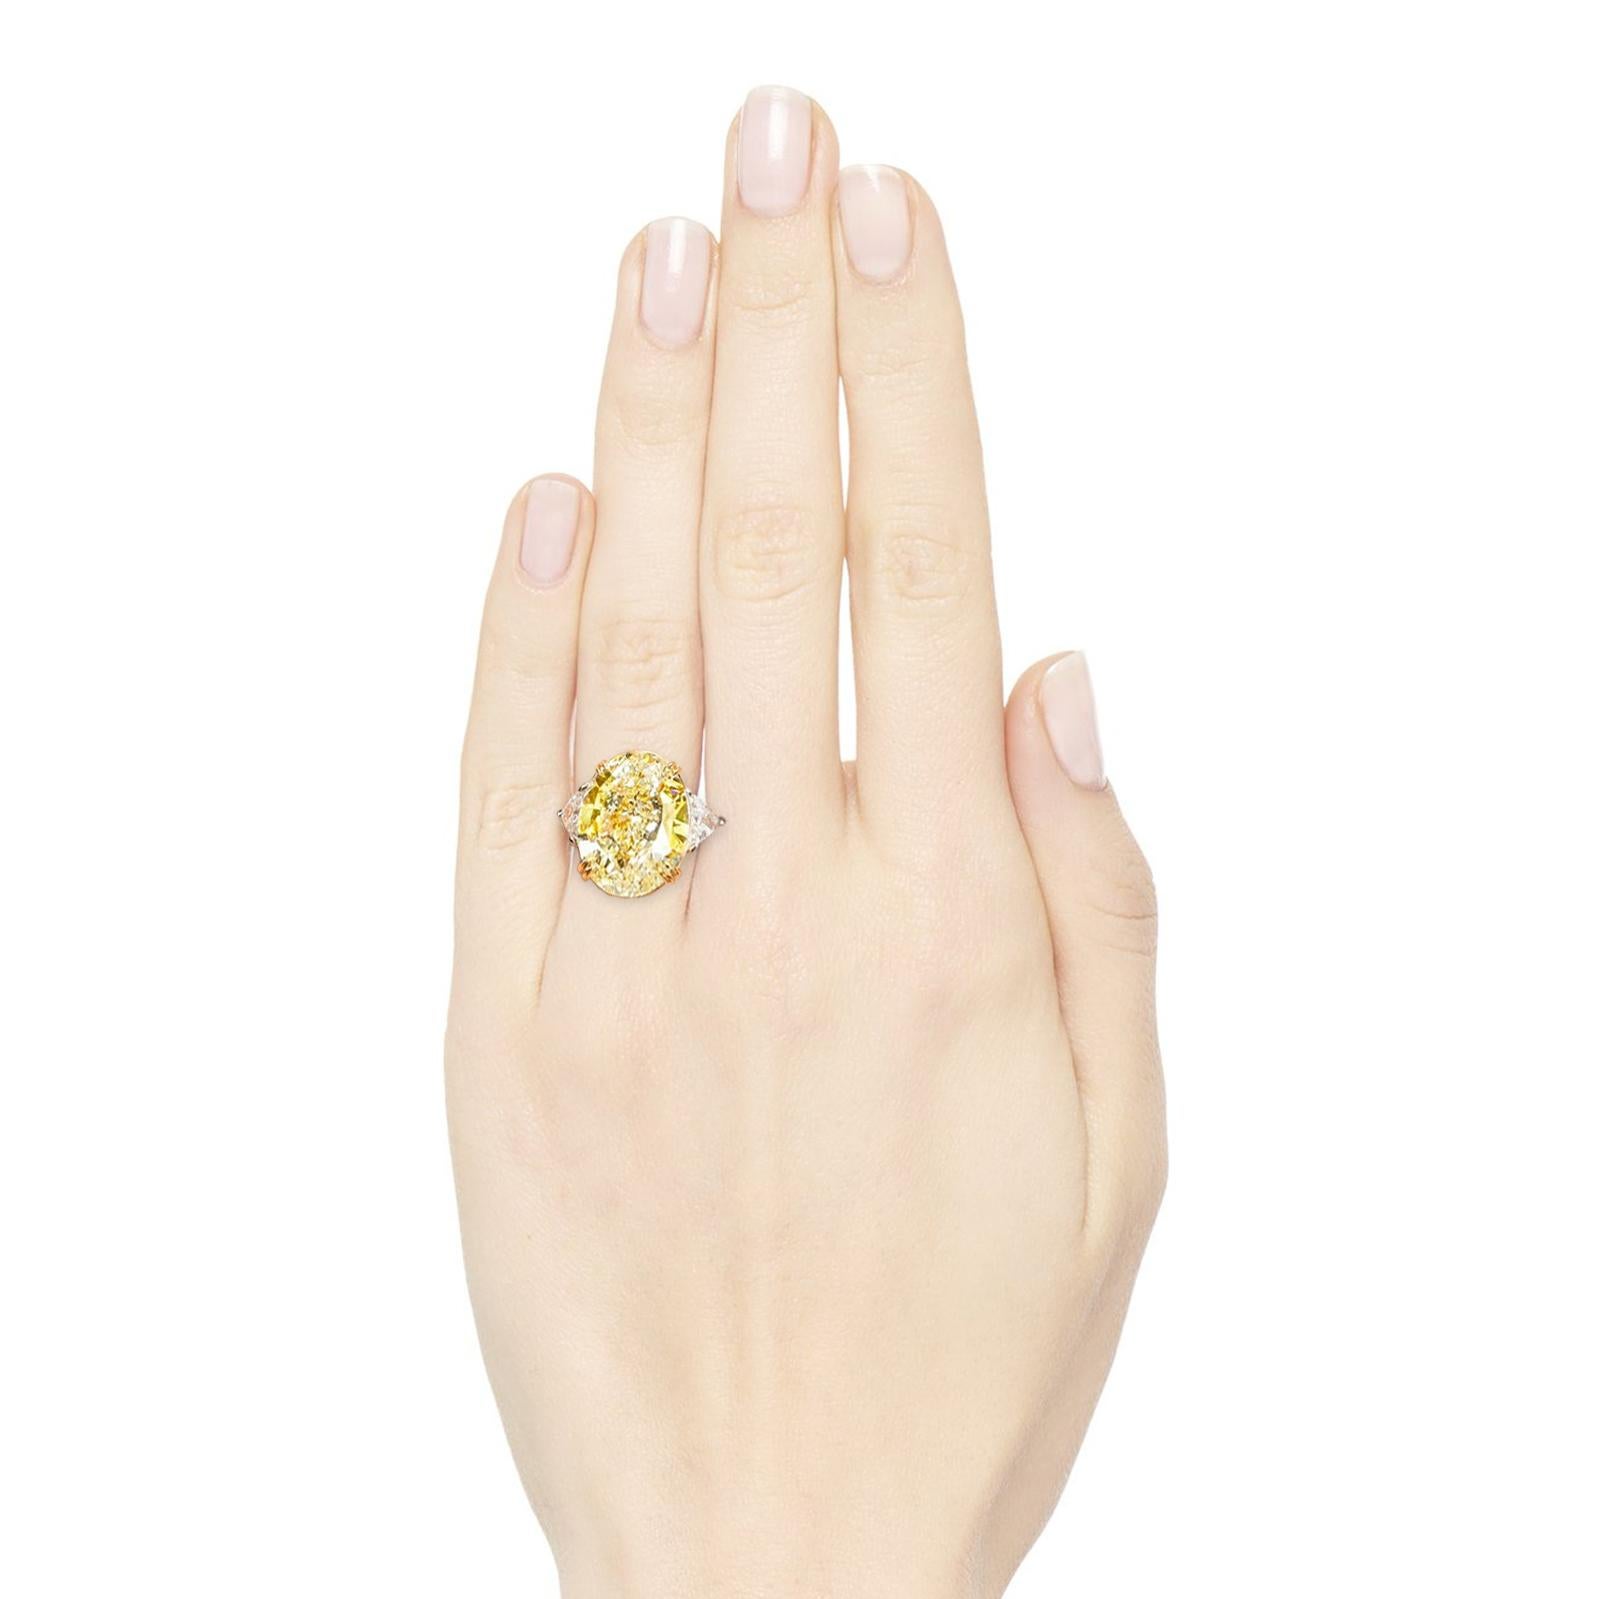 Modern EXCEPTIONAL GIA Certified 5 Carat Flawless Fancy Yellow Diamond Ring For Sale